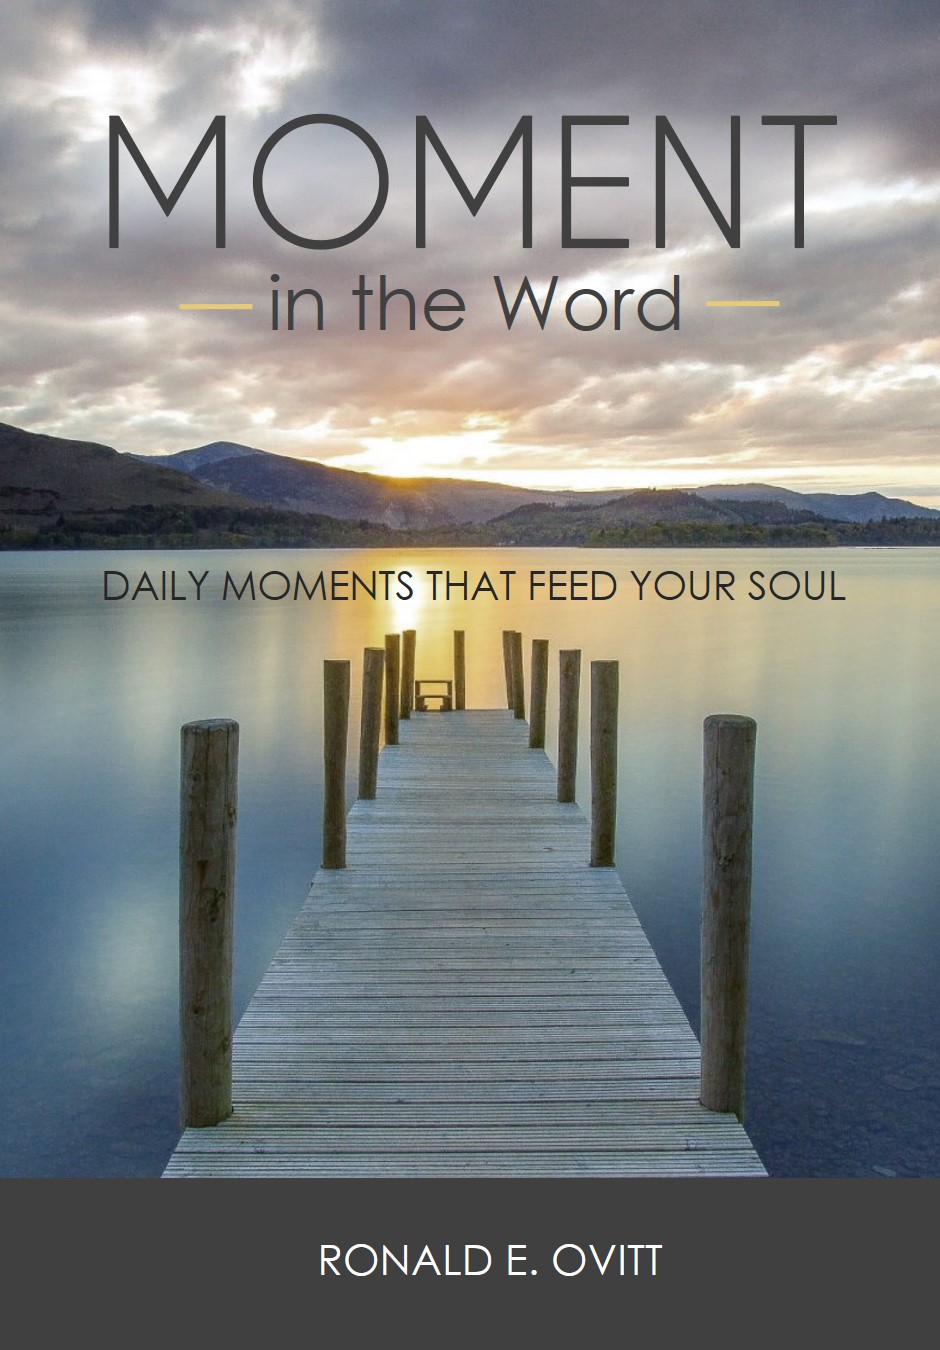 Cover of the "Moment in the Word" devotional